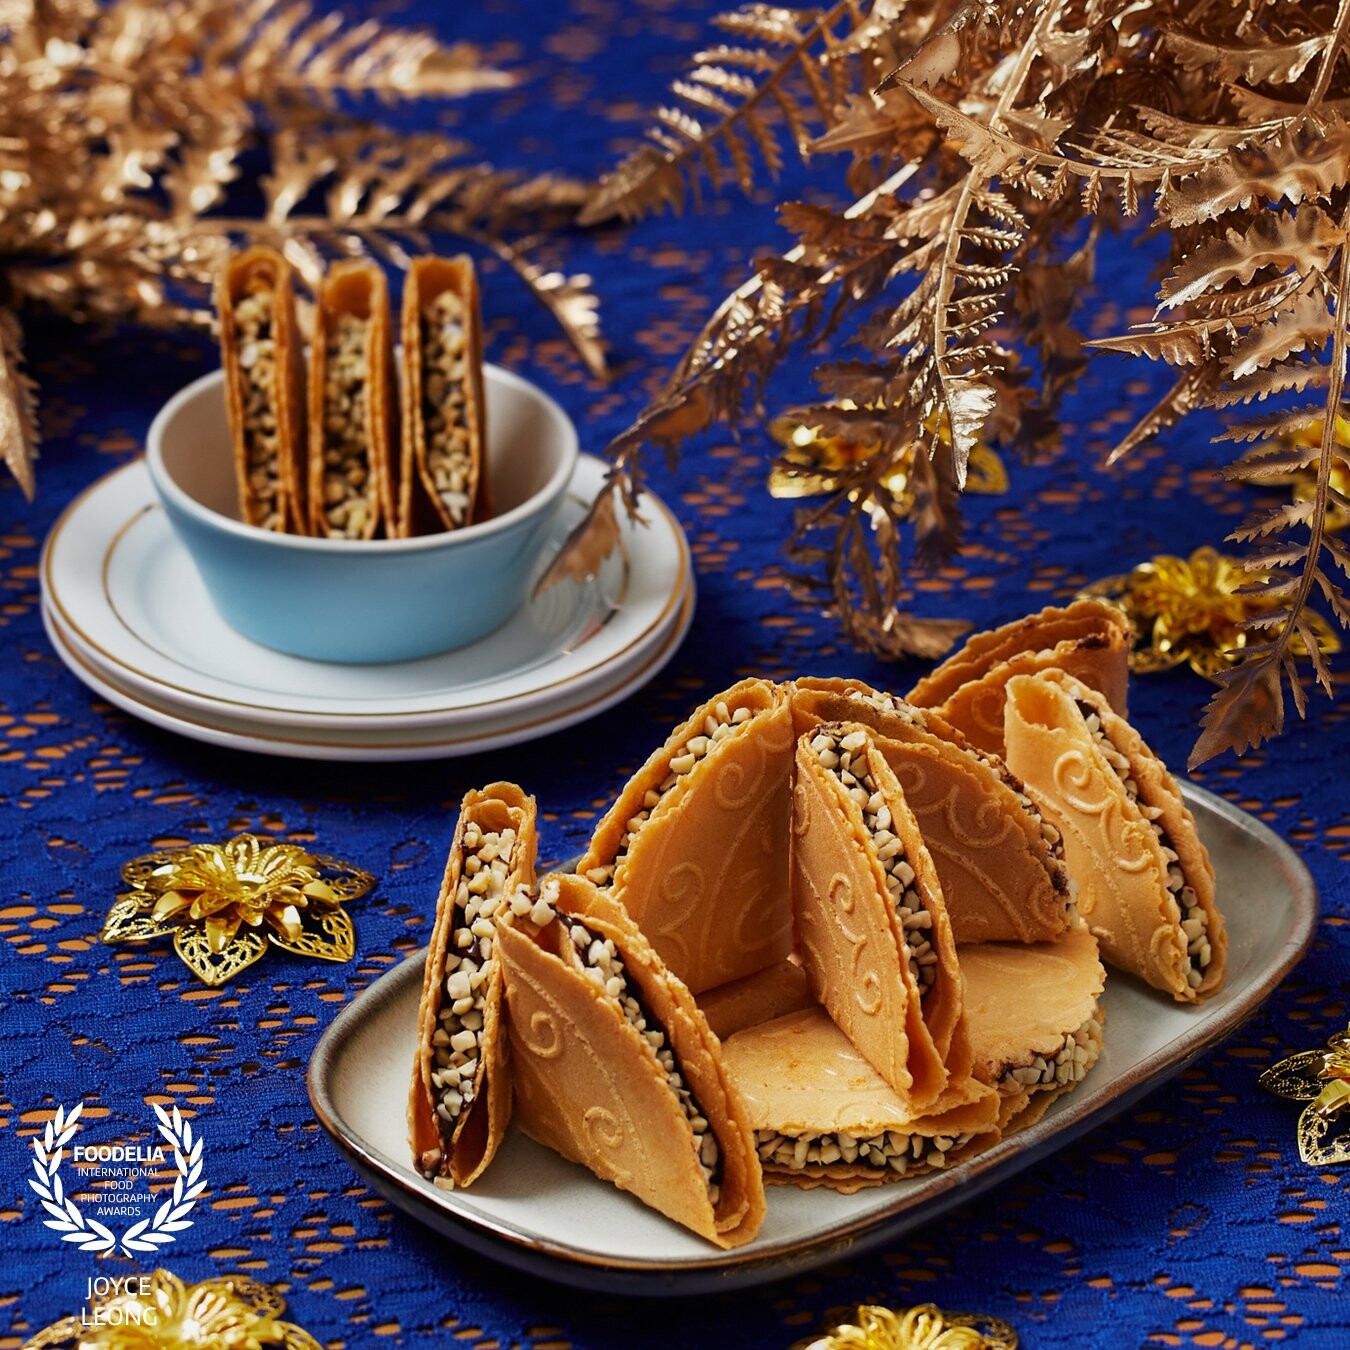 Using their brand colours of royal blue and gold, this image was created for a client for the Hari Raya celebrations. The love letters were arranged as such to showcase their nutella and nuts filling.